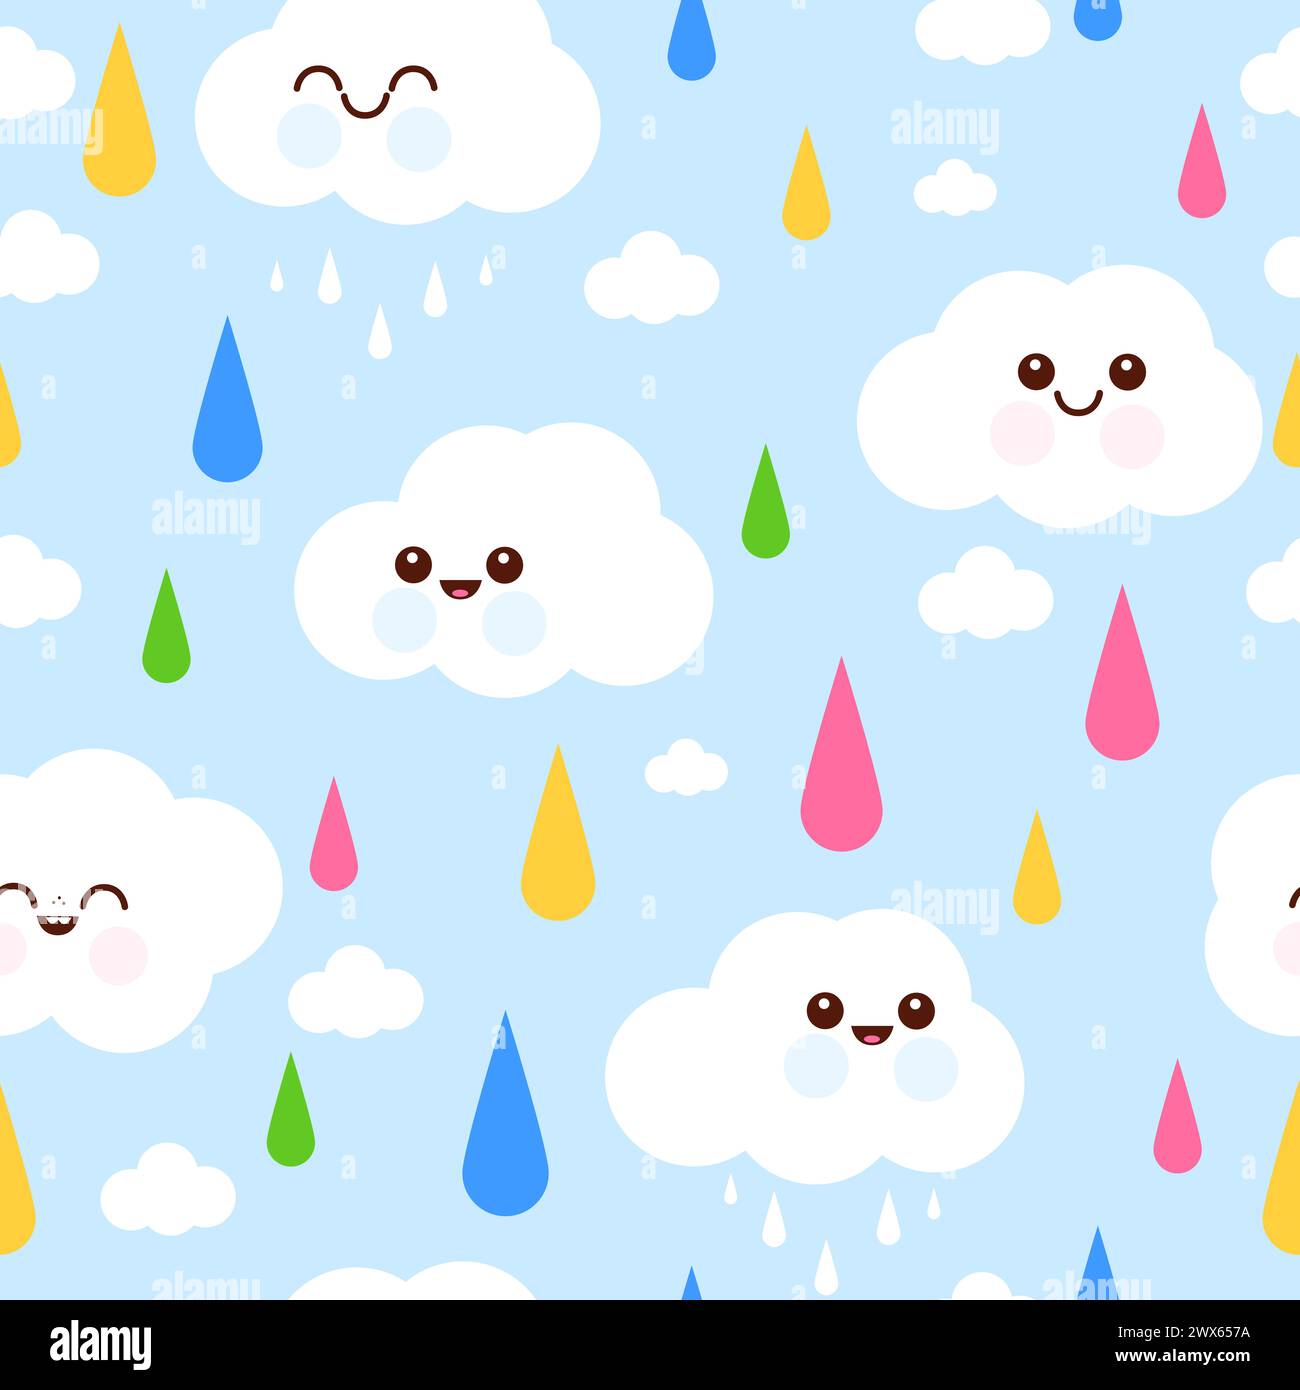 Cute cloud characters background. Colorful rain drops and cute clouds. Seamless pattern. Stock Photo